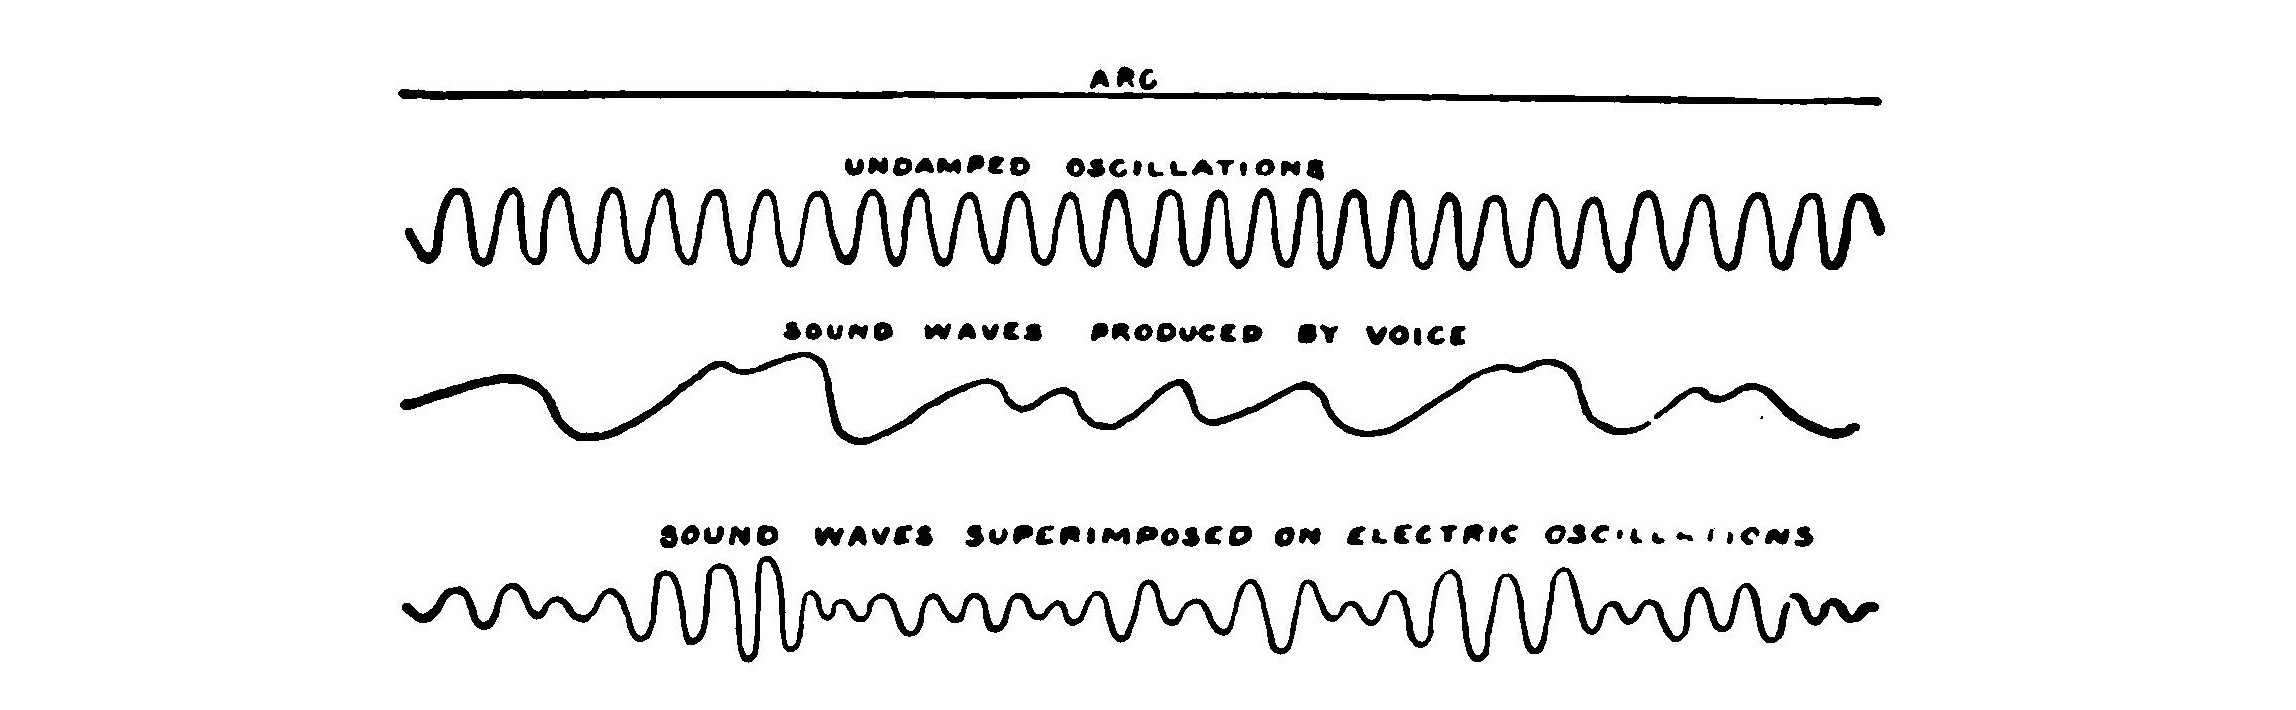 FIG. 144.—How the sound waves of the voice are impressed upon undamped oscillations.